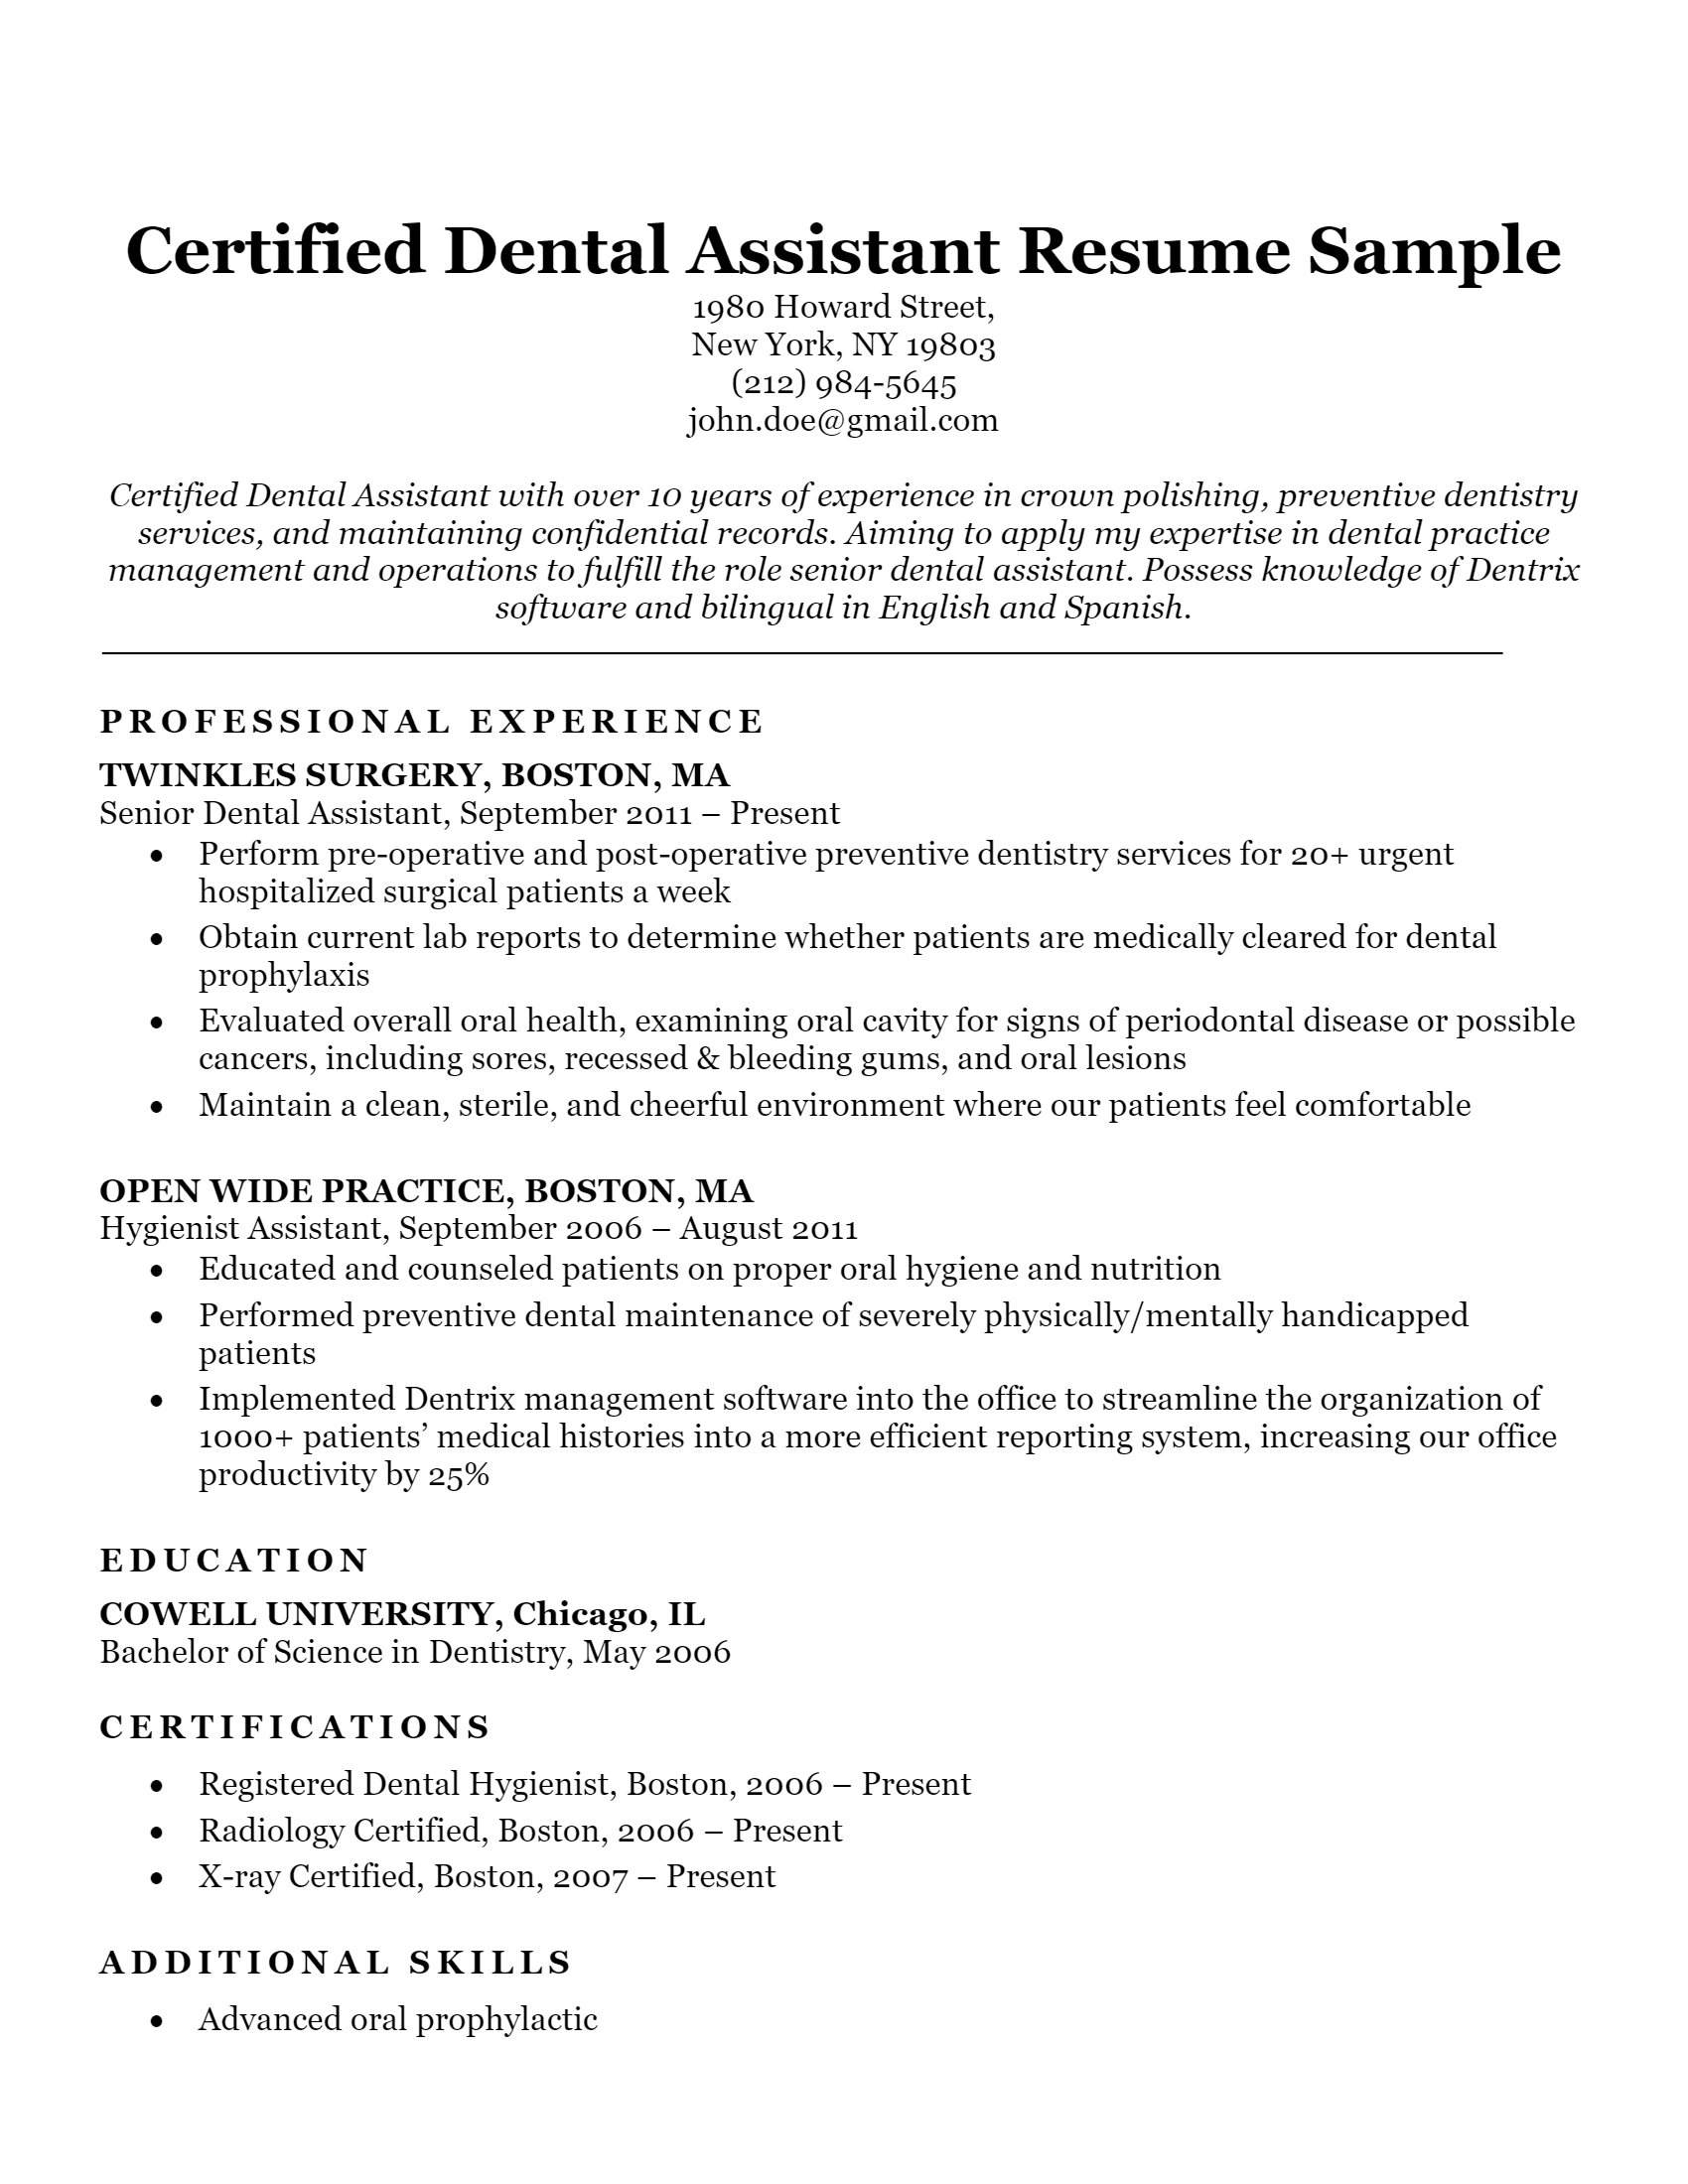 Certified Dental Assistant .Docx (Word)